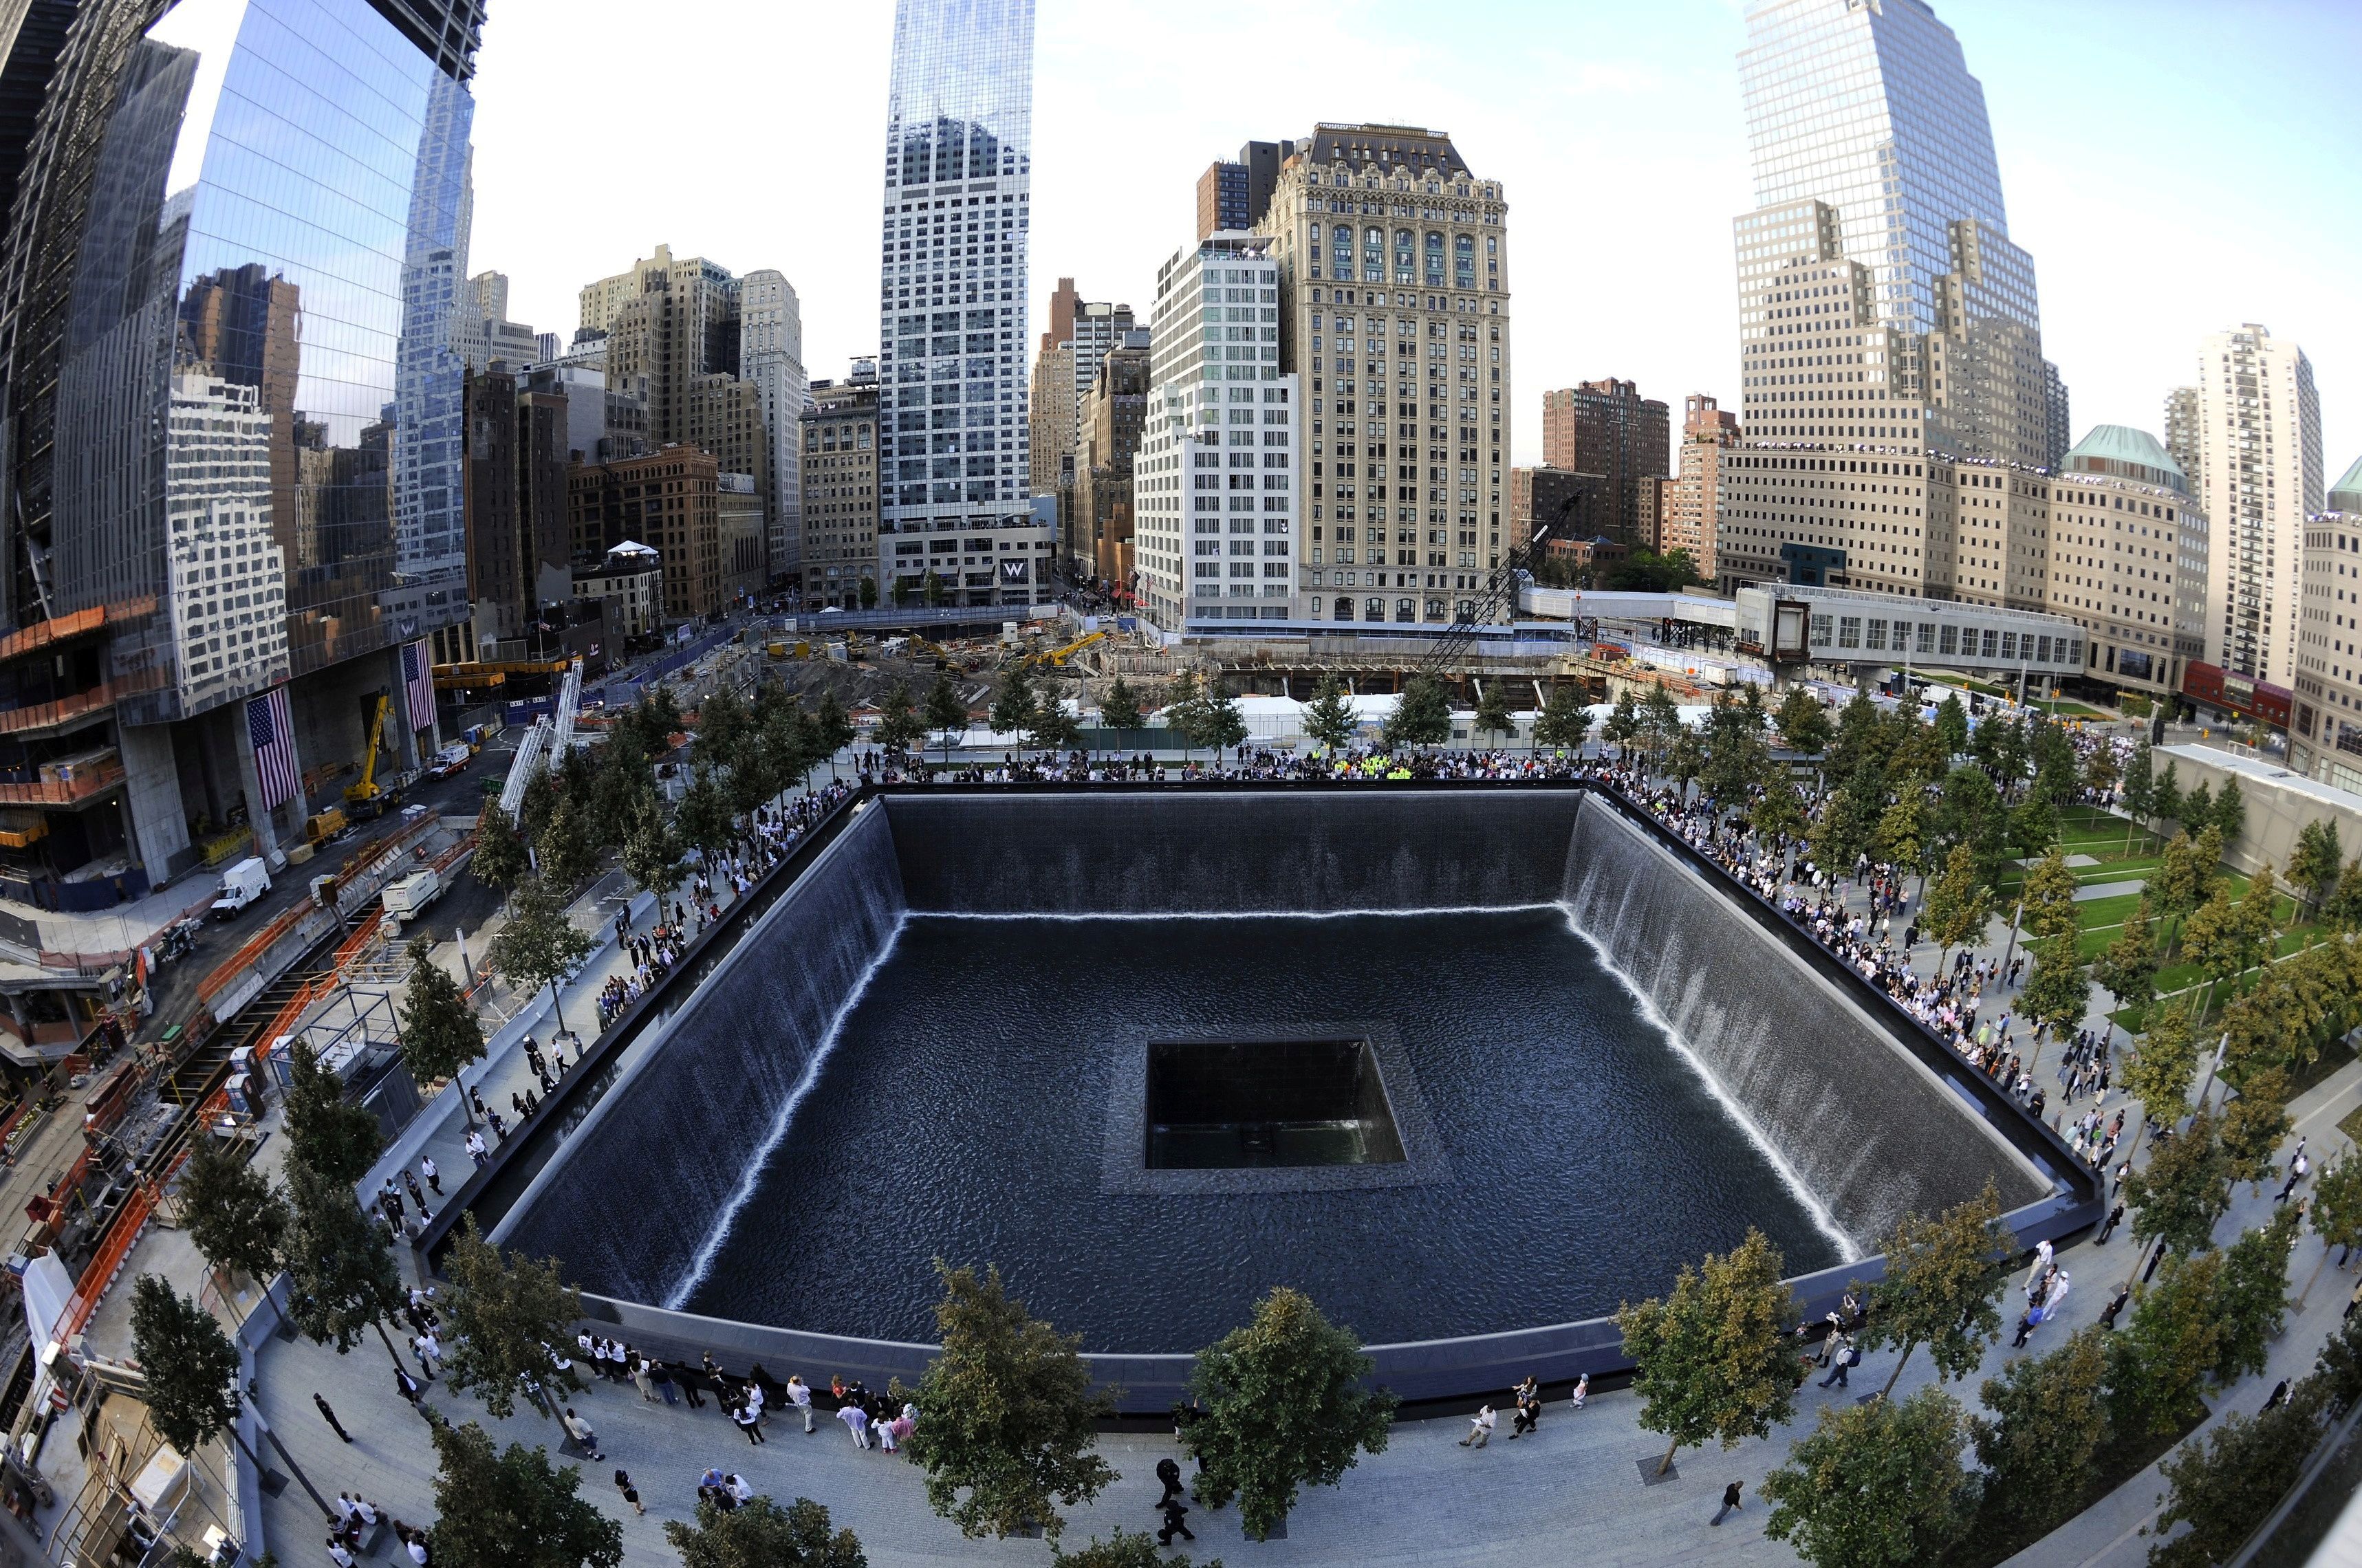 20th anniversary of the September 11 attacks